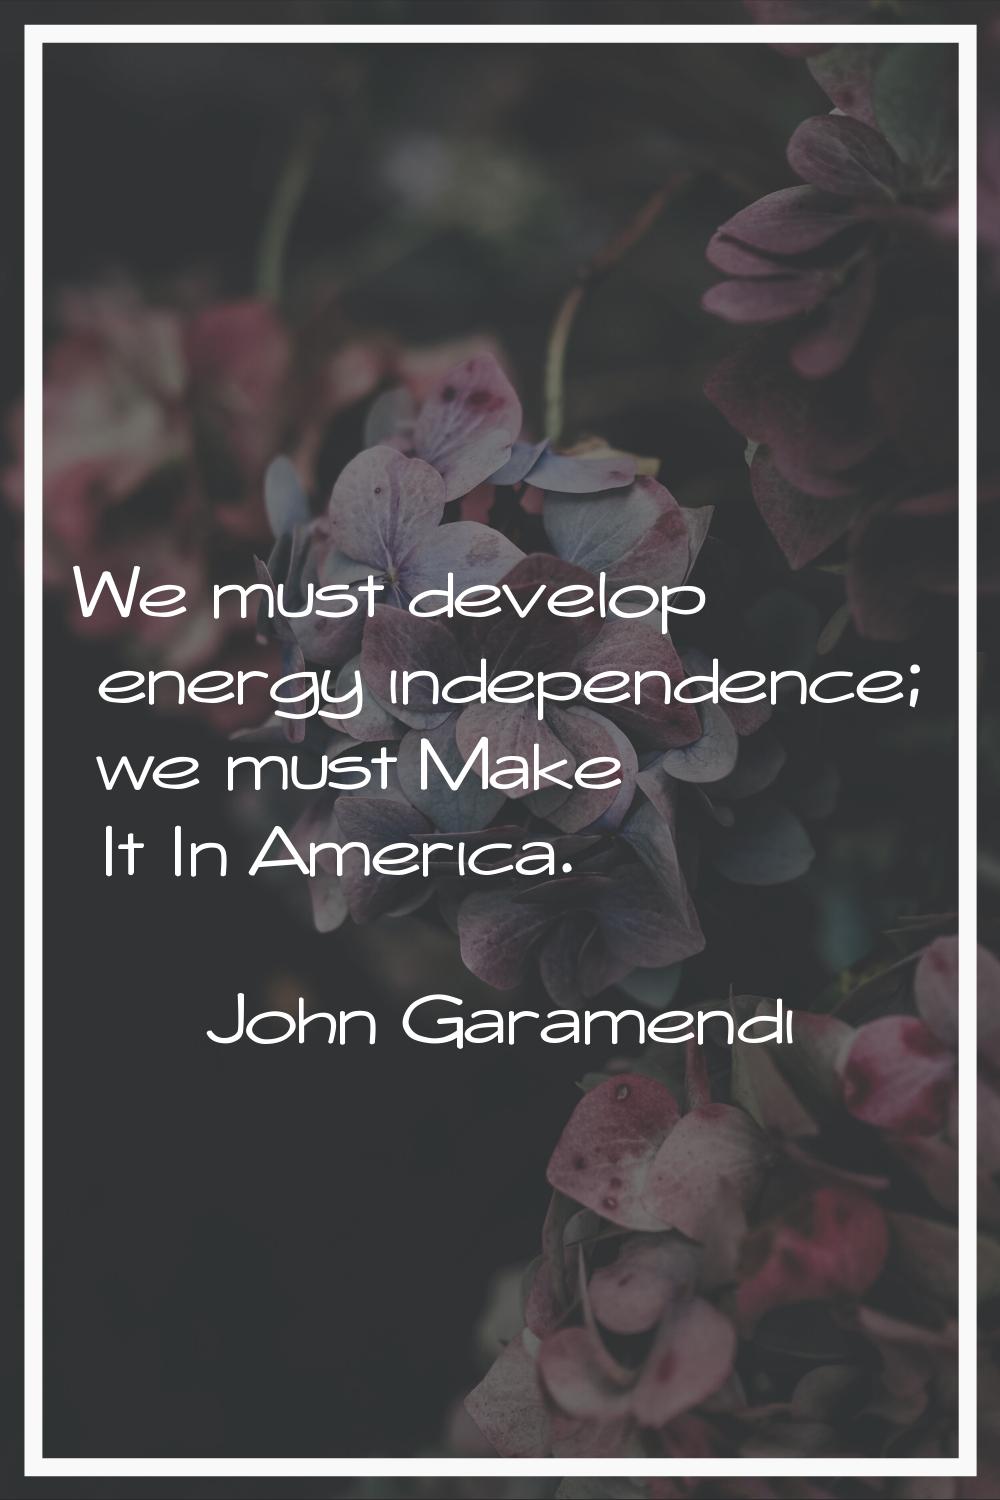 We must develop energy independence; we must Make It In America.